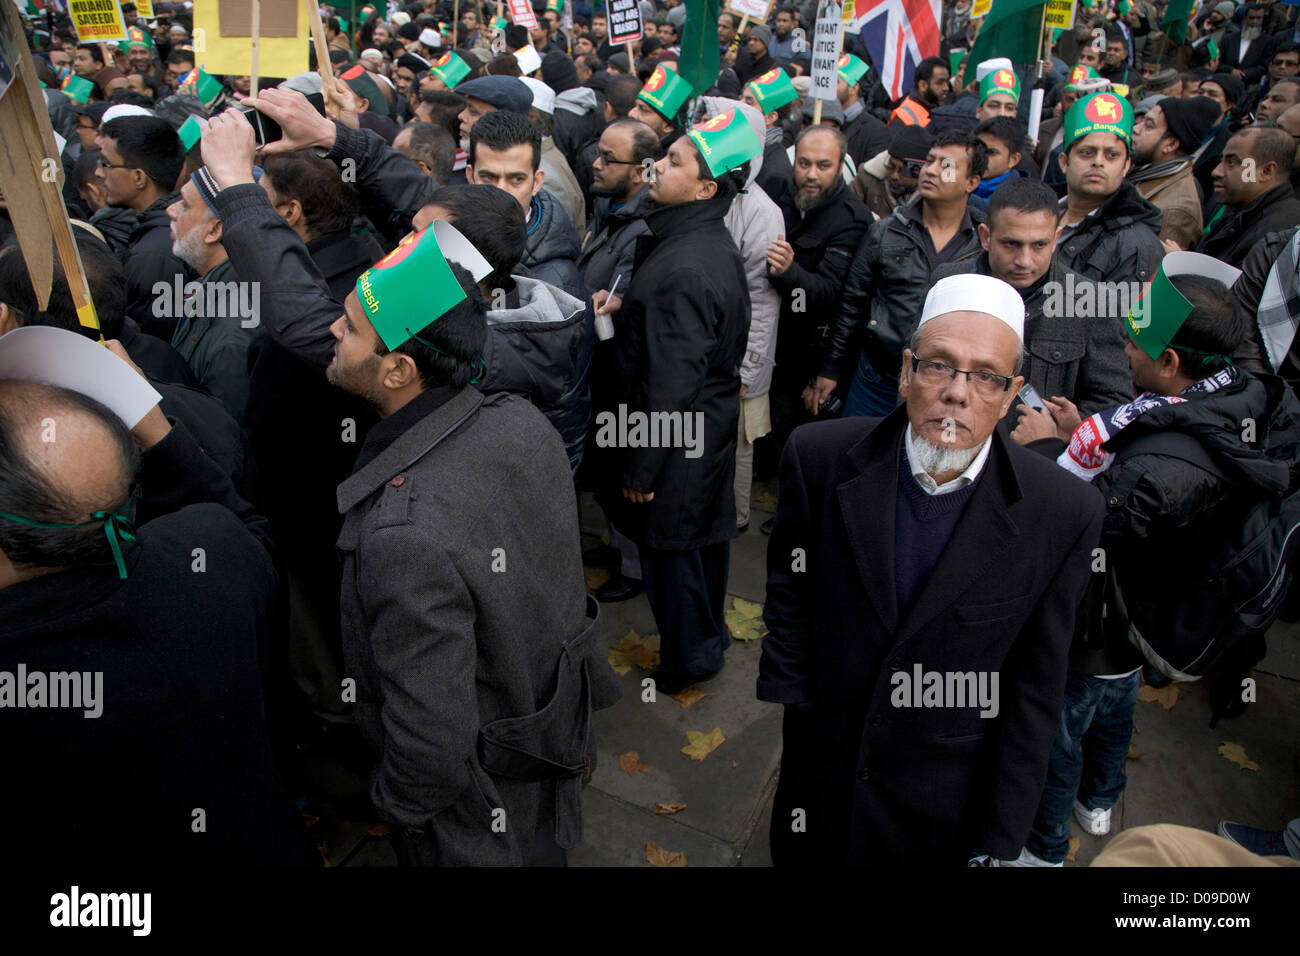 20th November 2012. London UK. Protesters  from the Bangladeshi community in Britain gather in front of the Houses of Parliament in Westminster to protest against the imprisonment of leaders of opposition parties by the Bangladeshi Government. Stock Photo